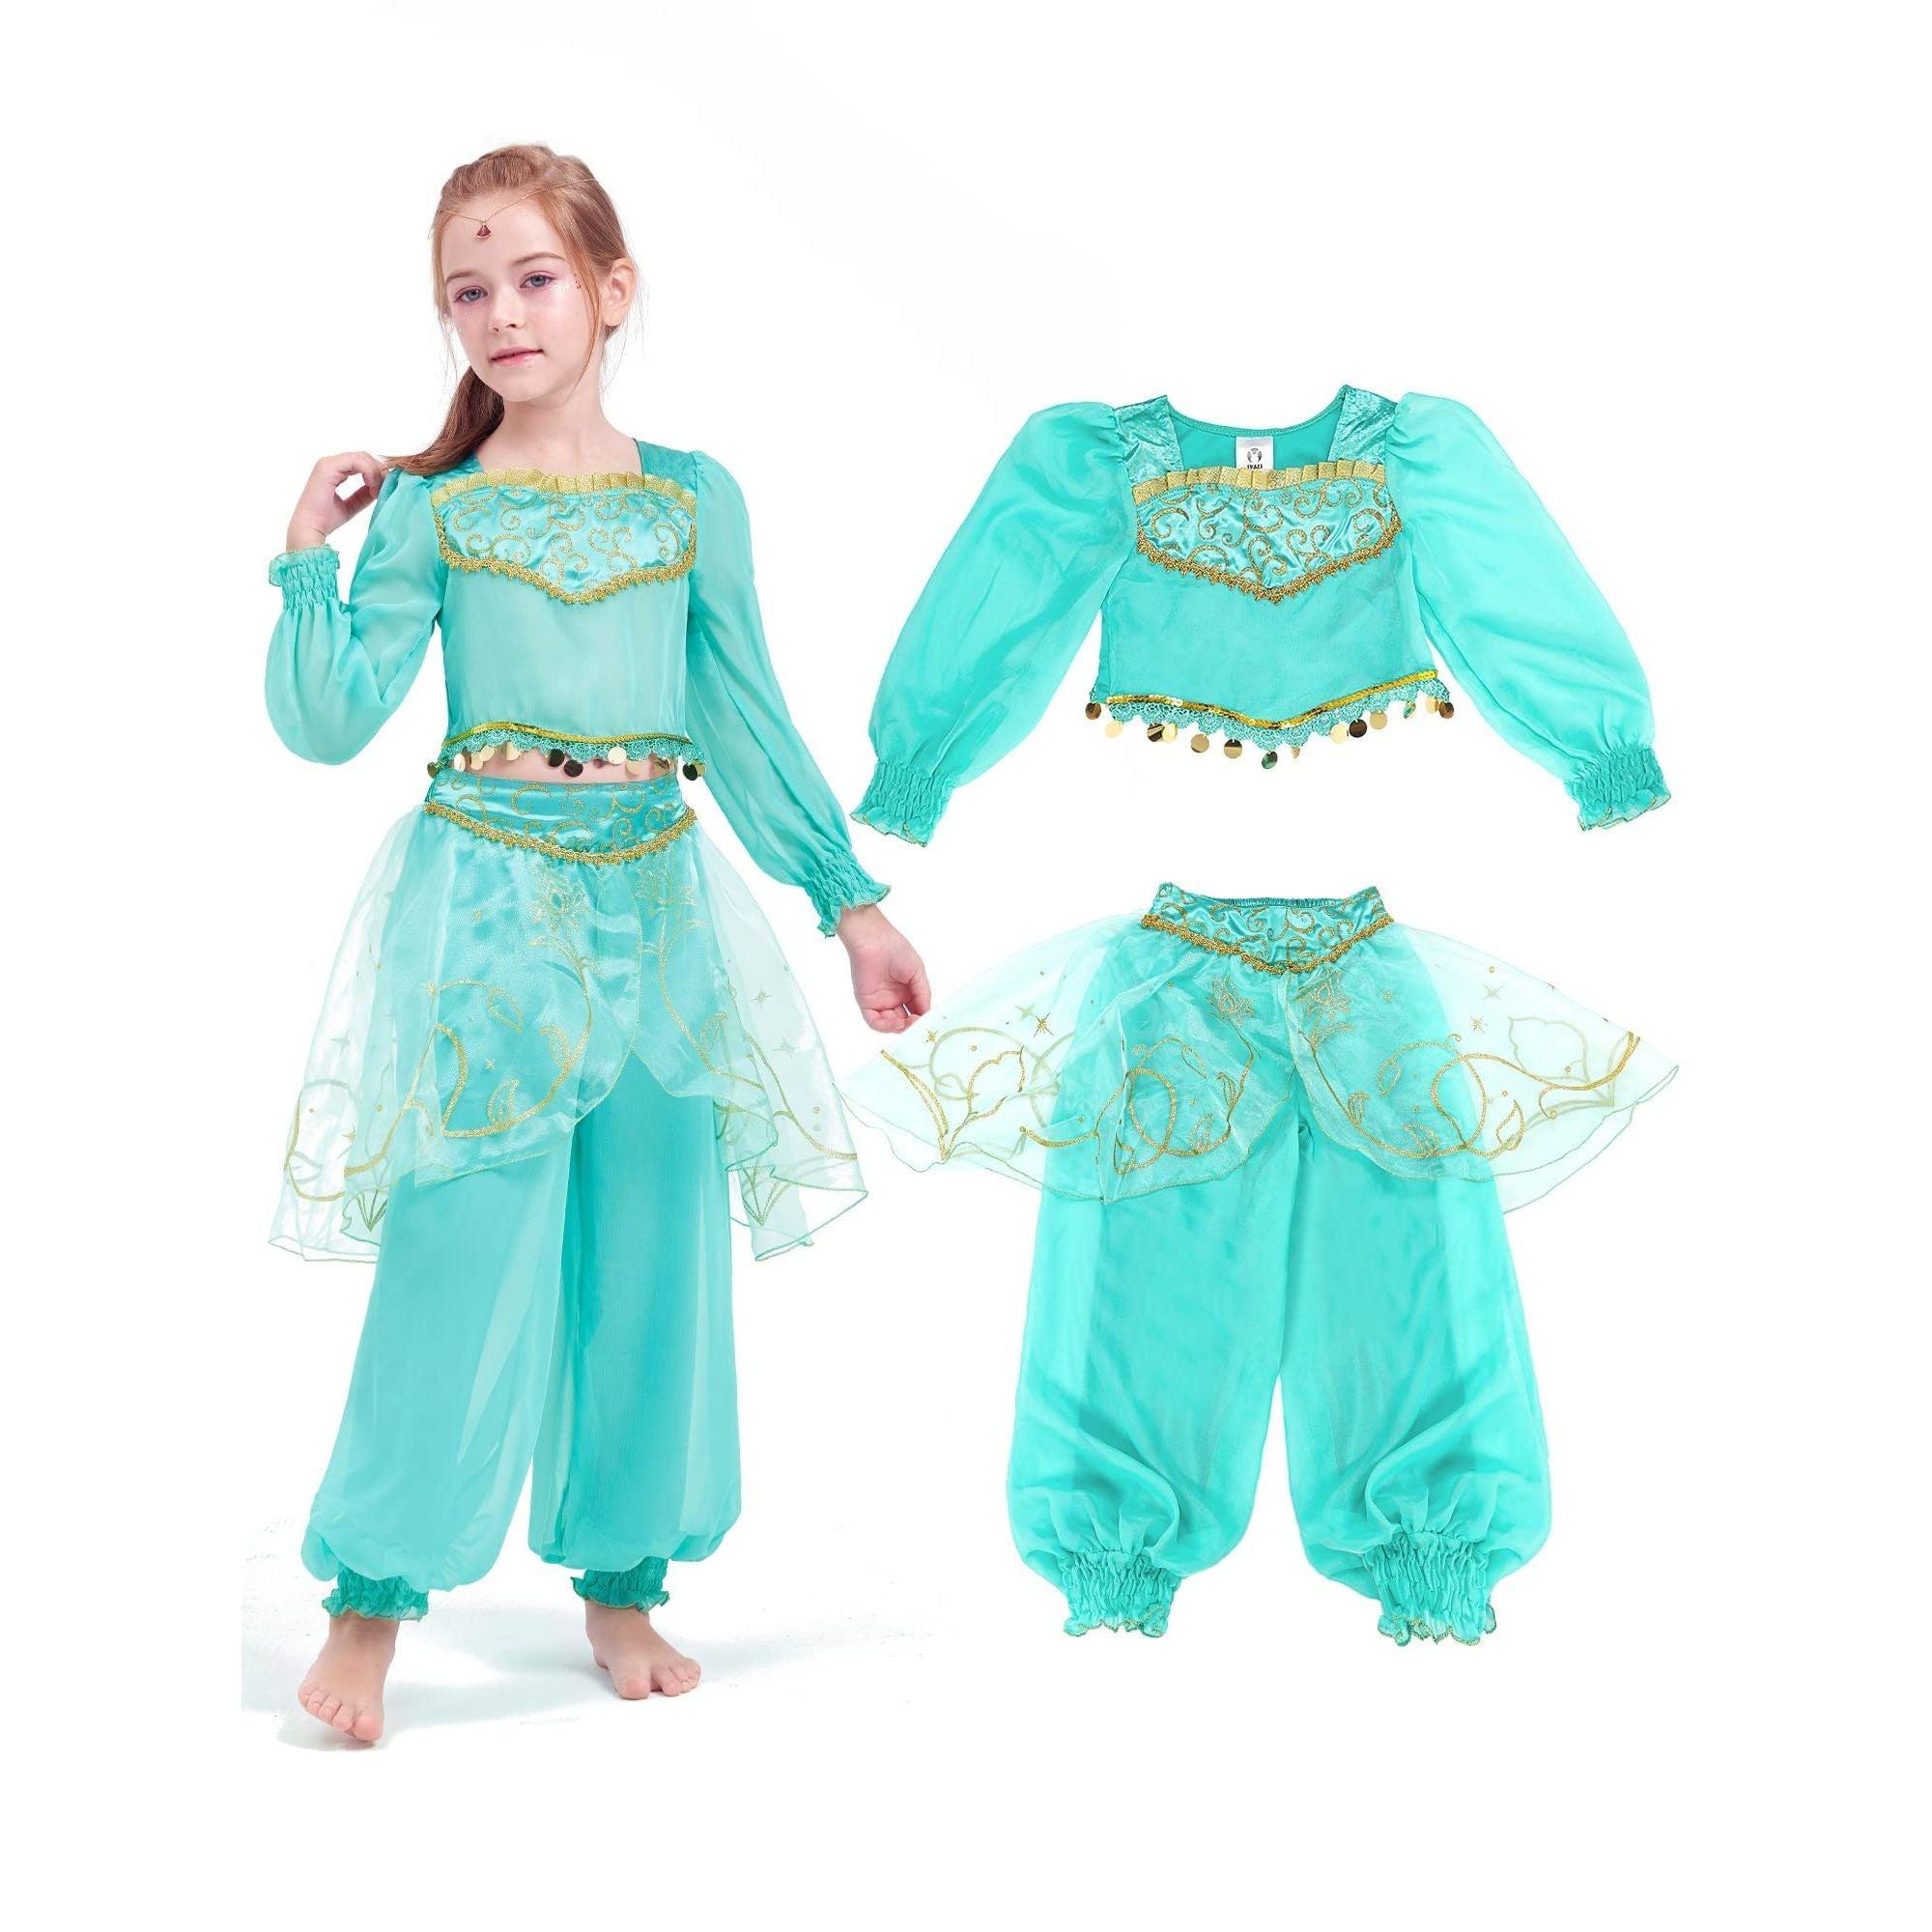 IKALI Girls Jasmine Costume Classic Princess Dress Toddler Gift Fancy Dress Up for Halloween Birthday Party 3-4Y 1